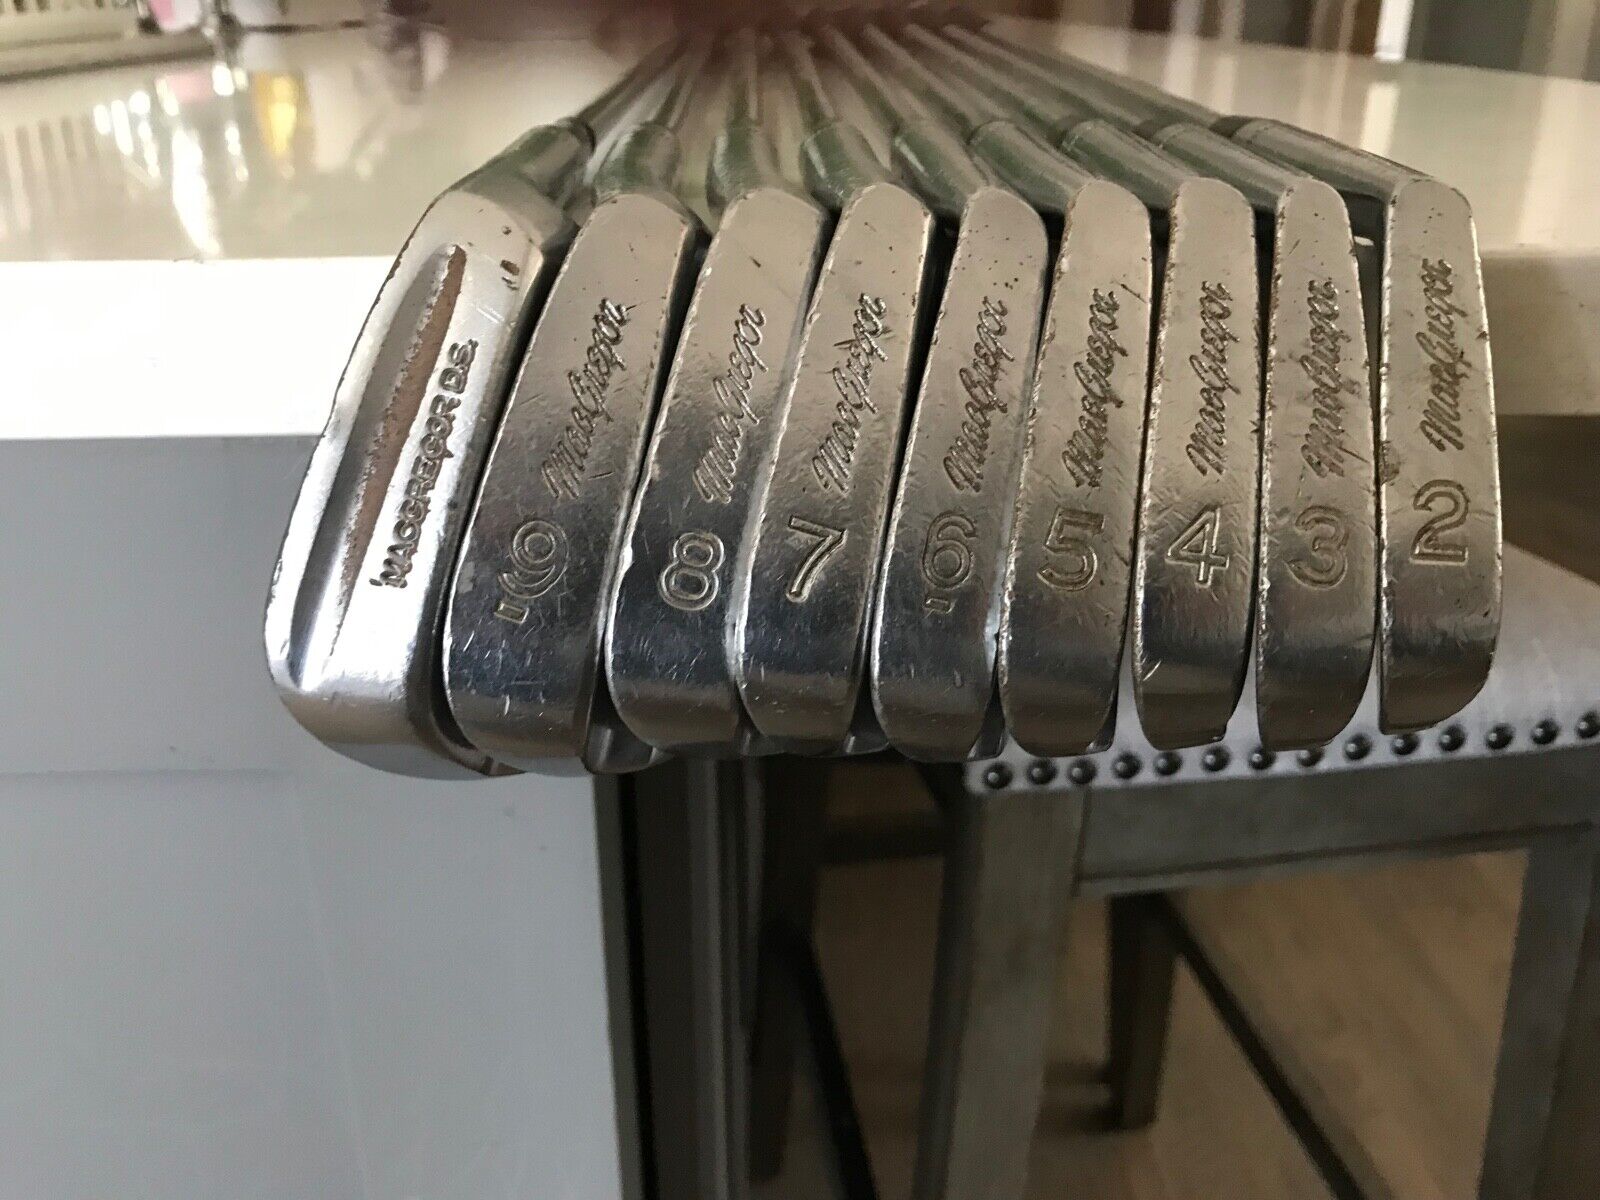 1965 Macgregor Tommy Armour Model 915 Irons